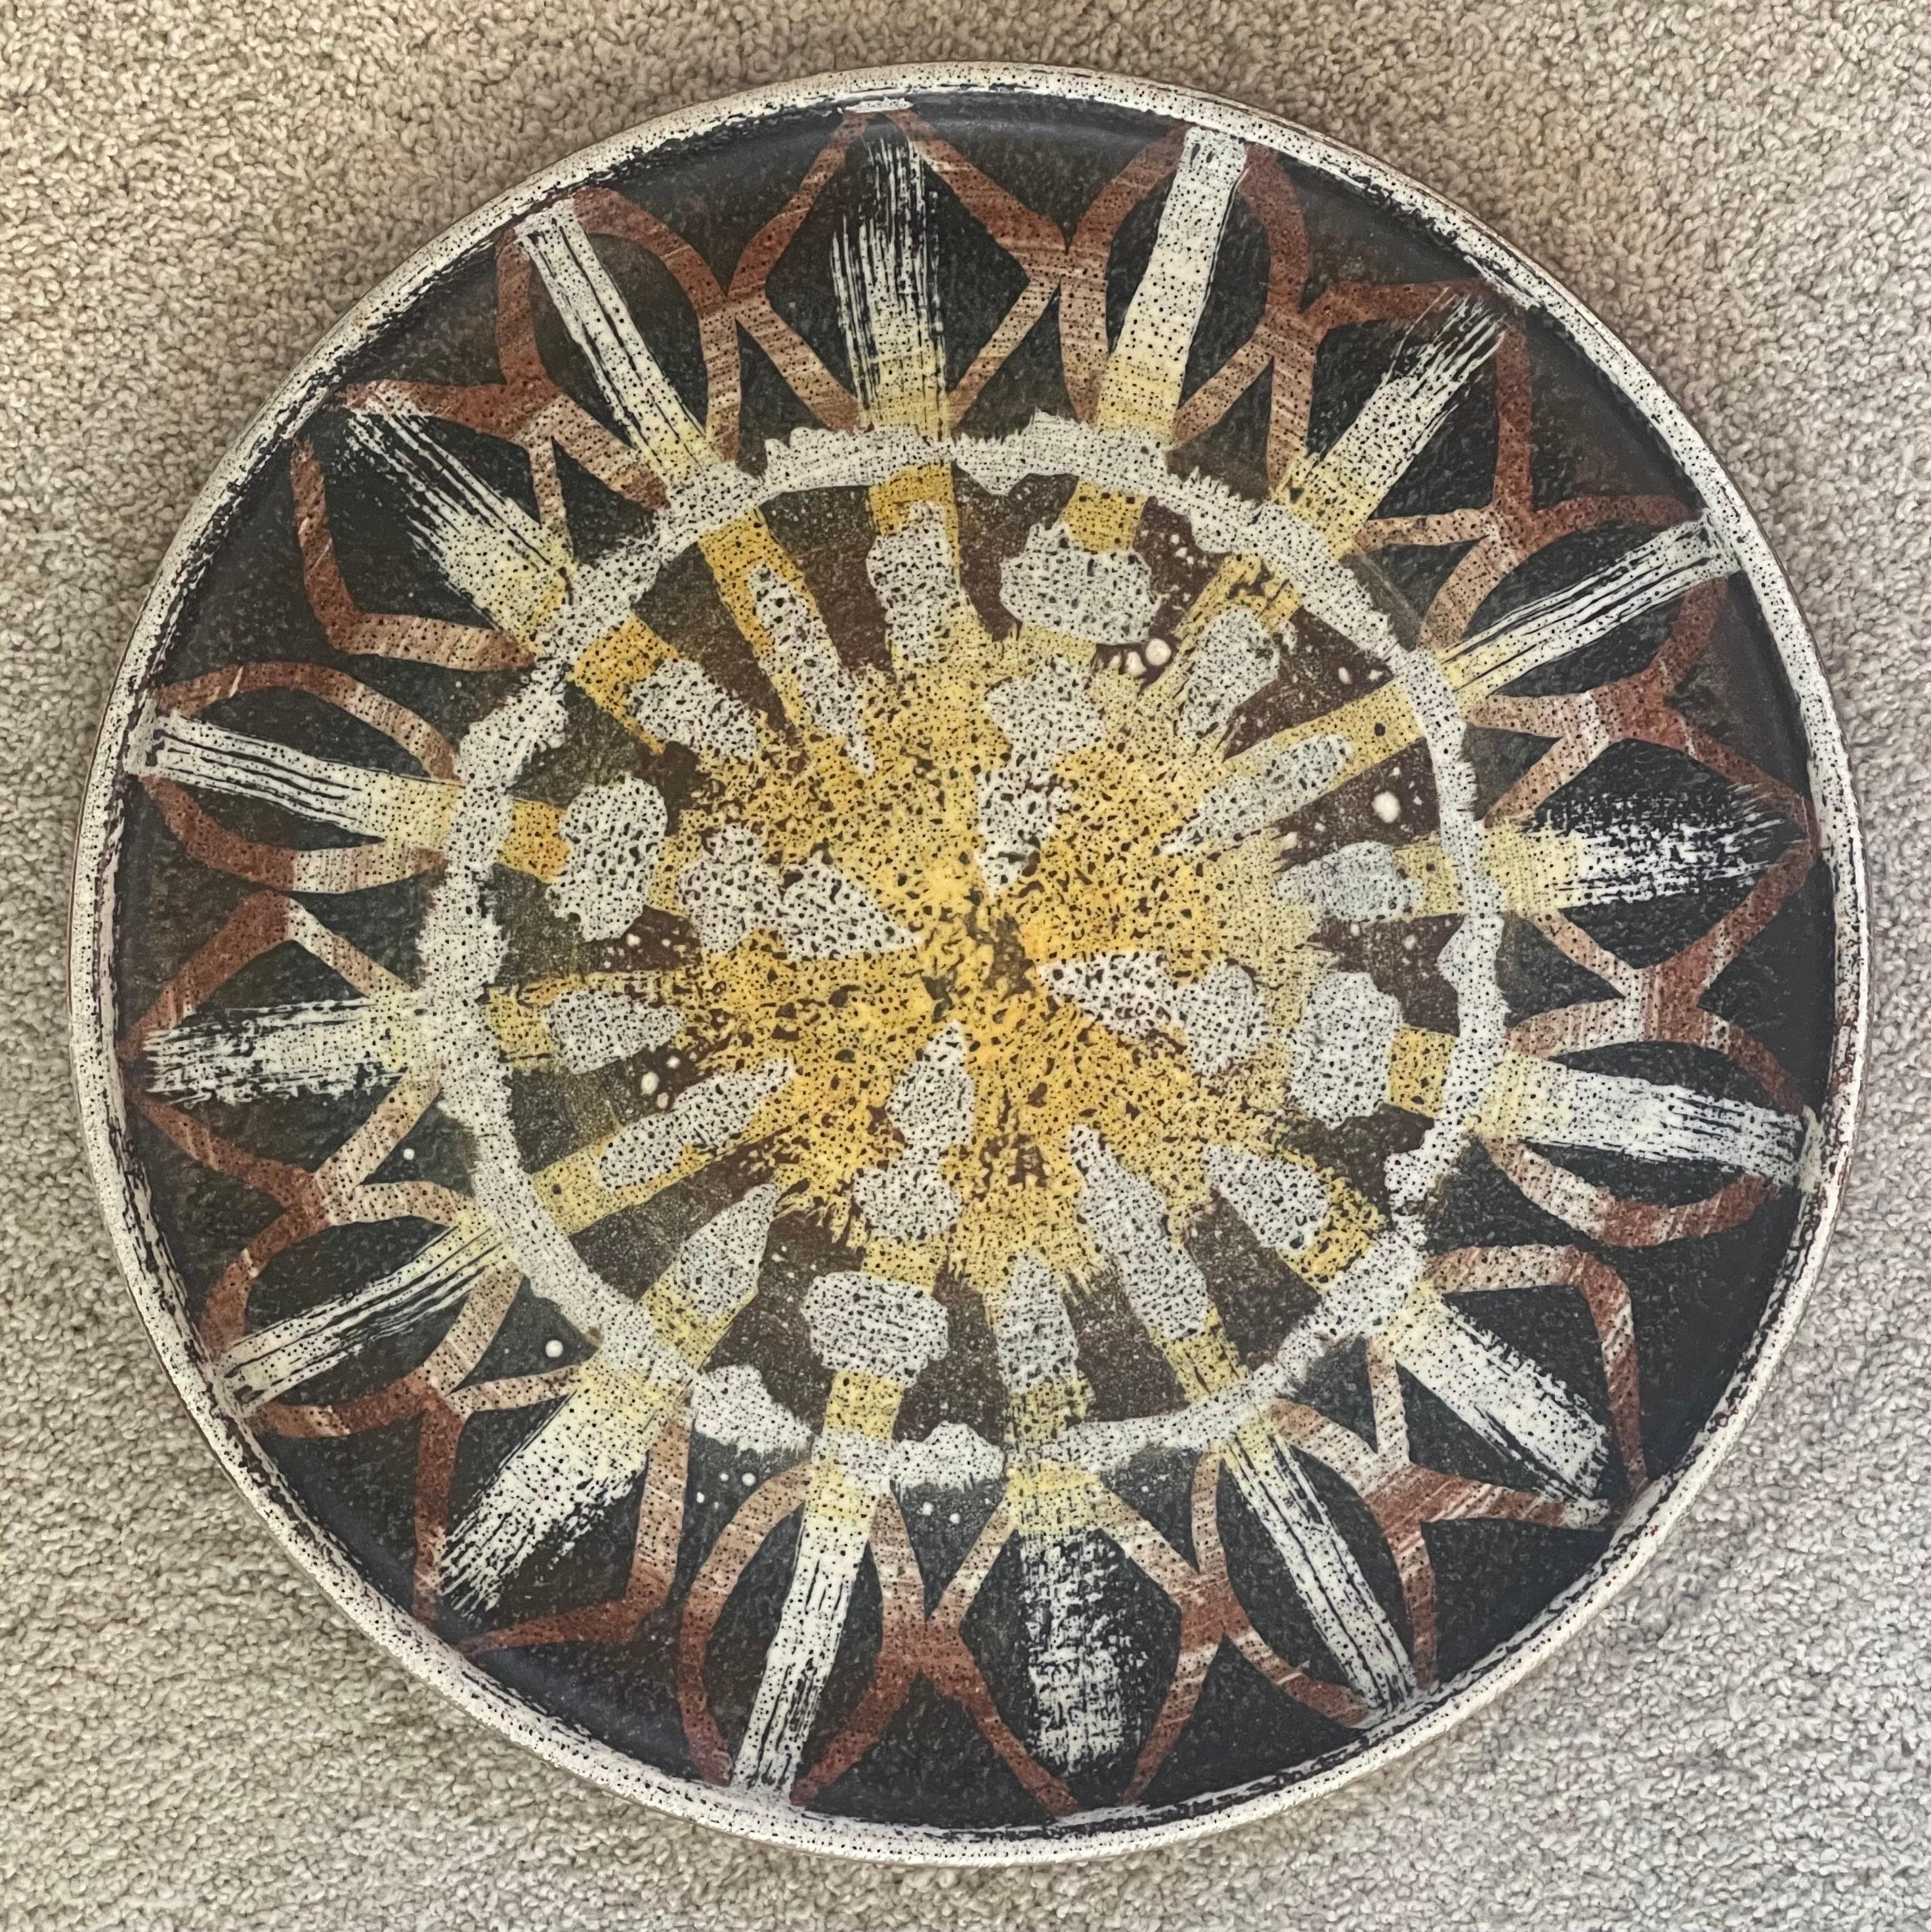 A very nice California studio pottery charger, circa 1970s. The piece is signed on the reverse and in excellent vintage condition with no chips or cracks. The piece measures 14.75